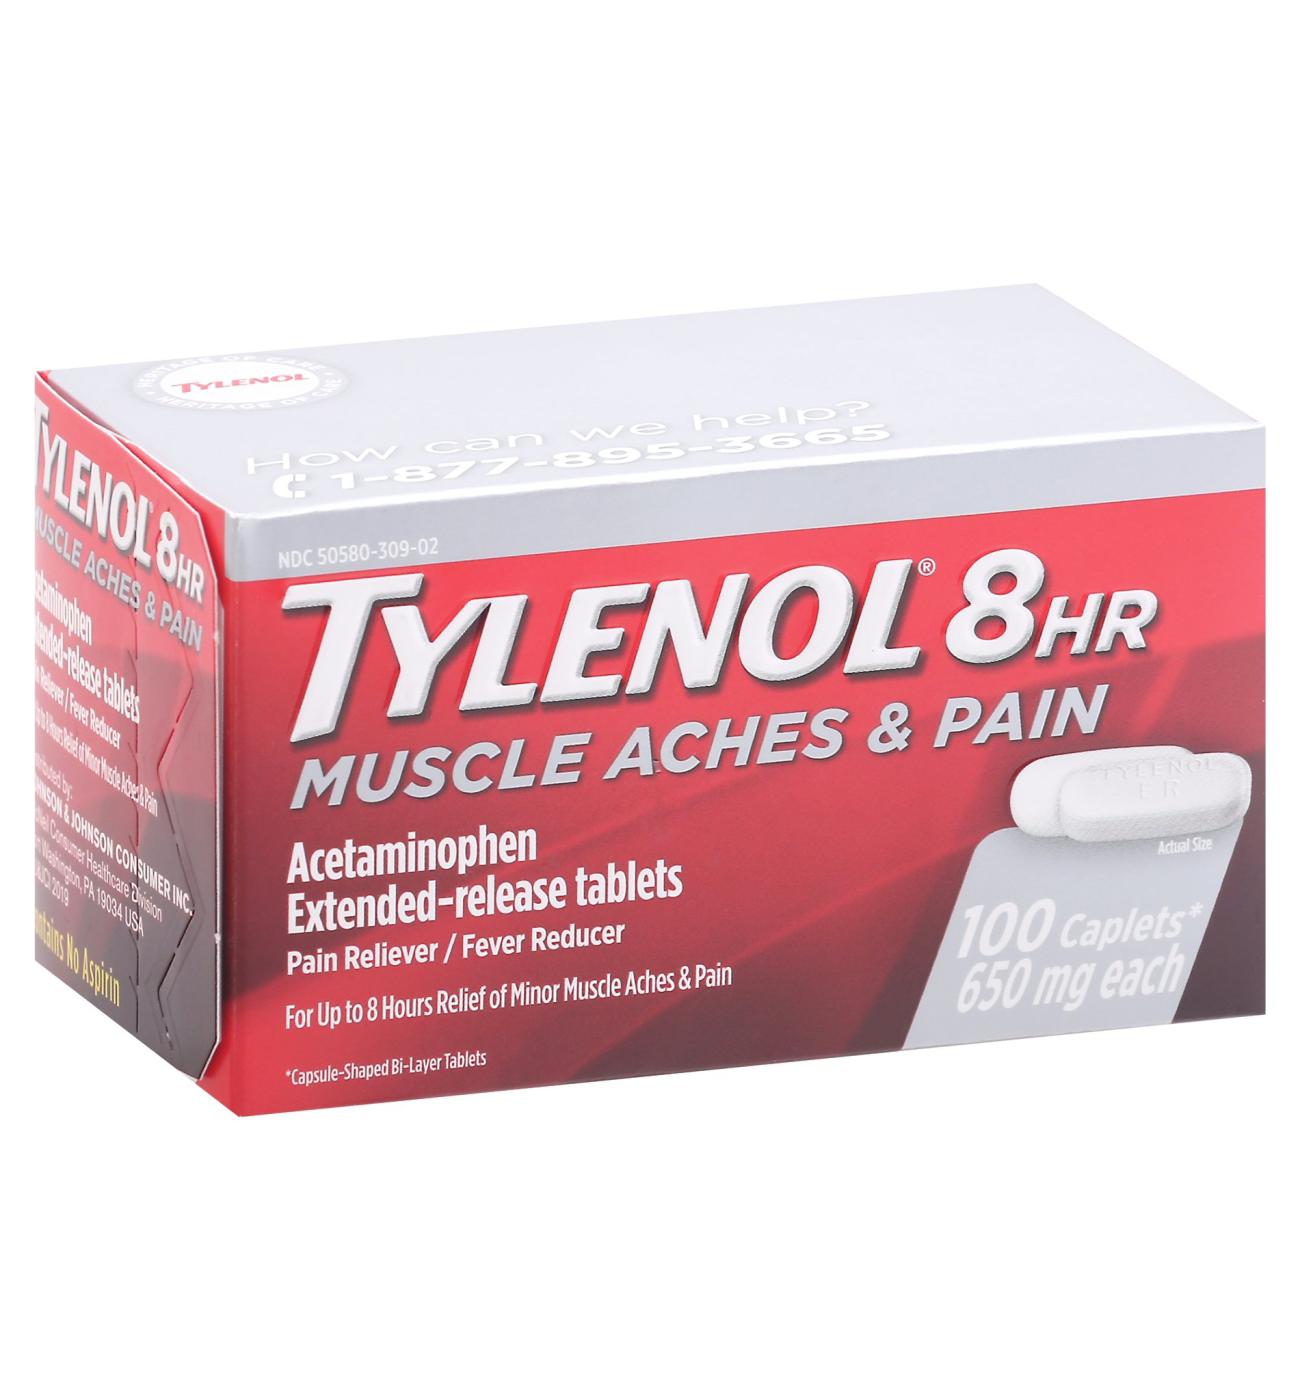 Tylenol 8 HR Muscle Aches & Pains; image 1 of 8